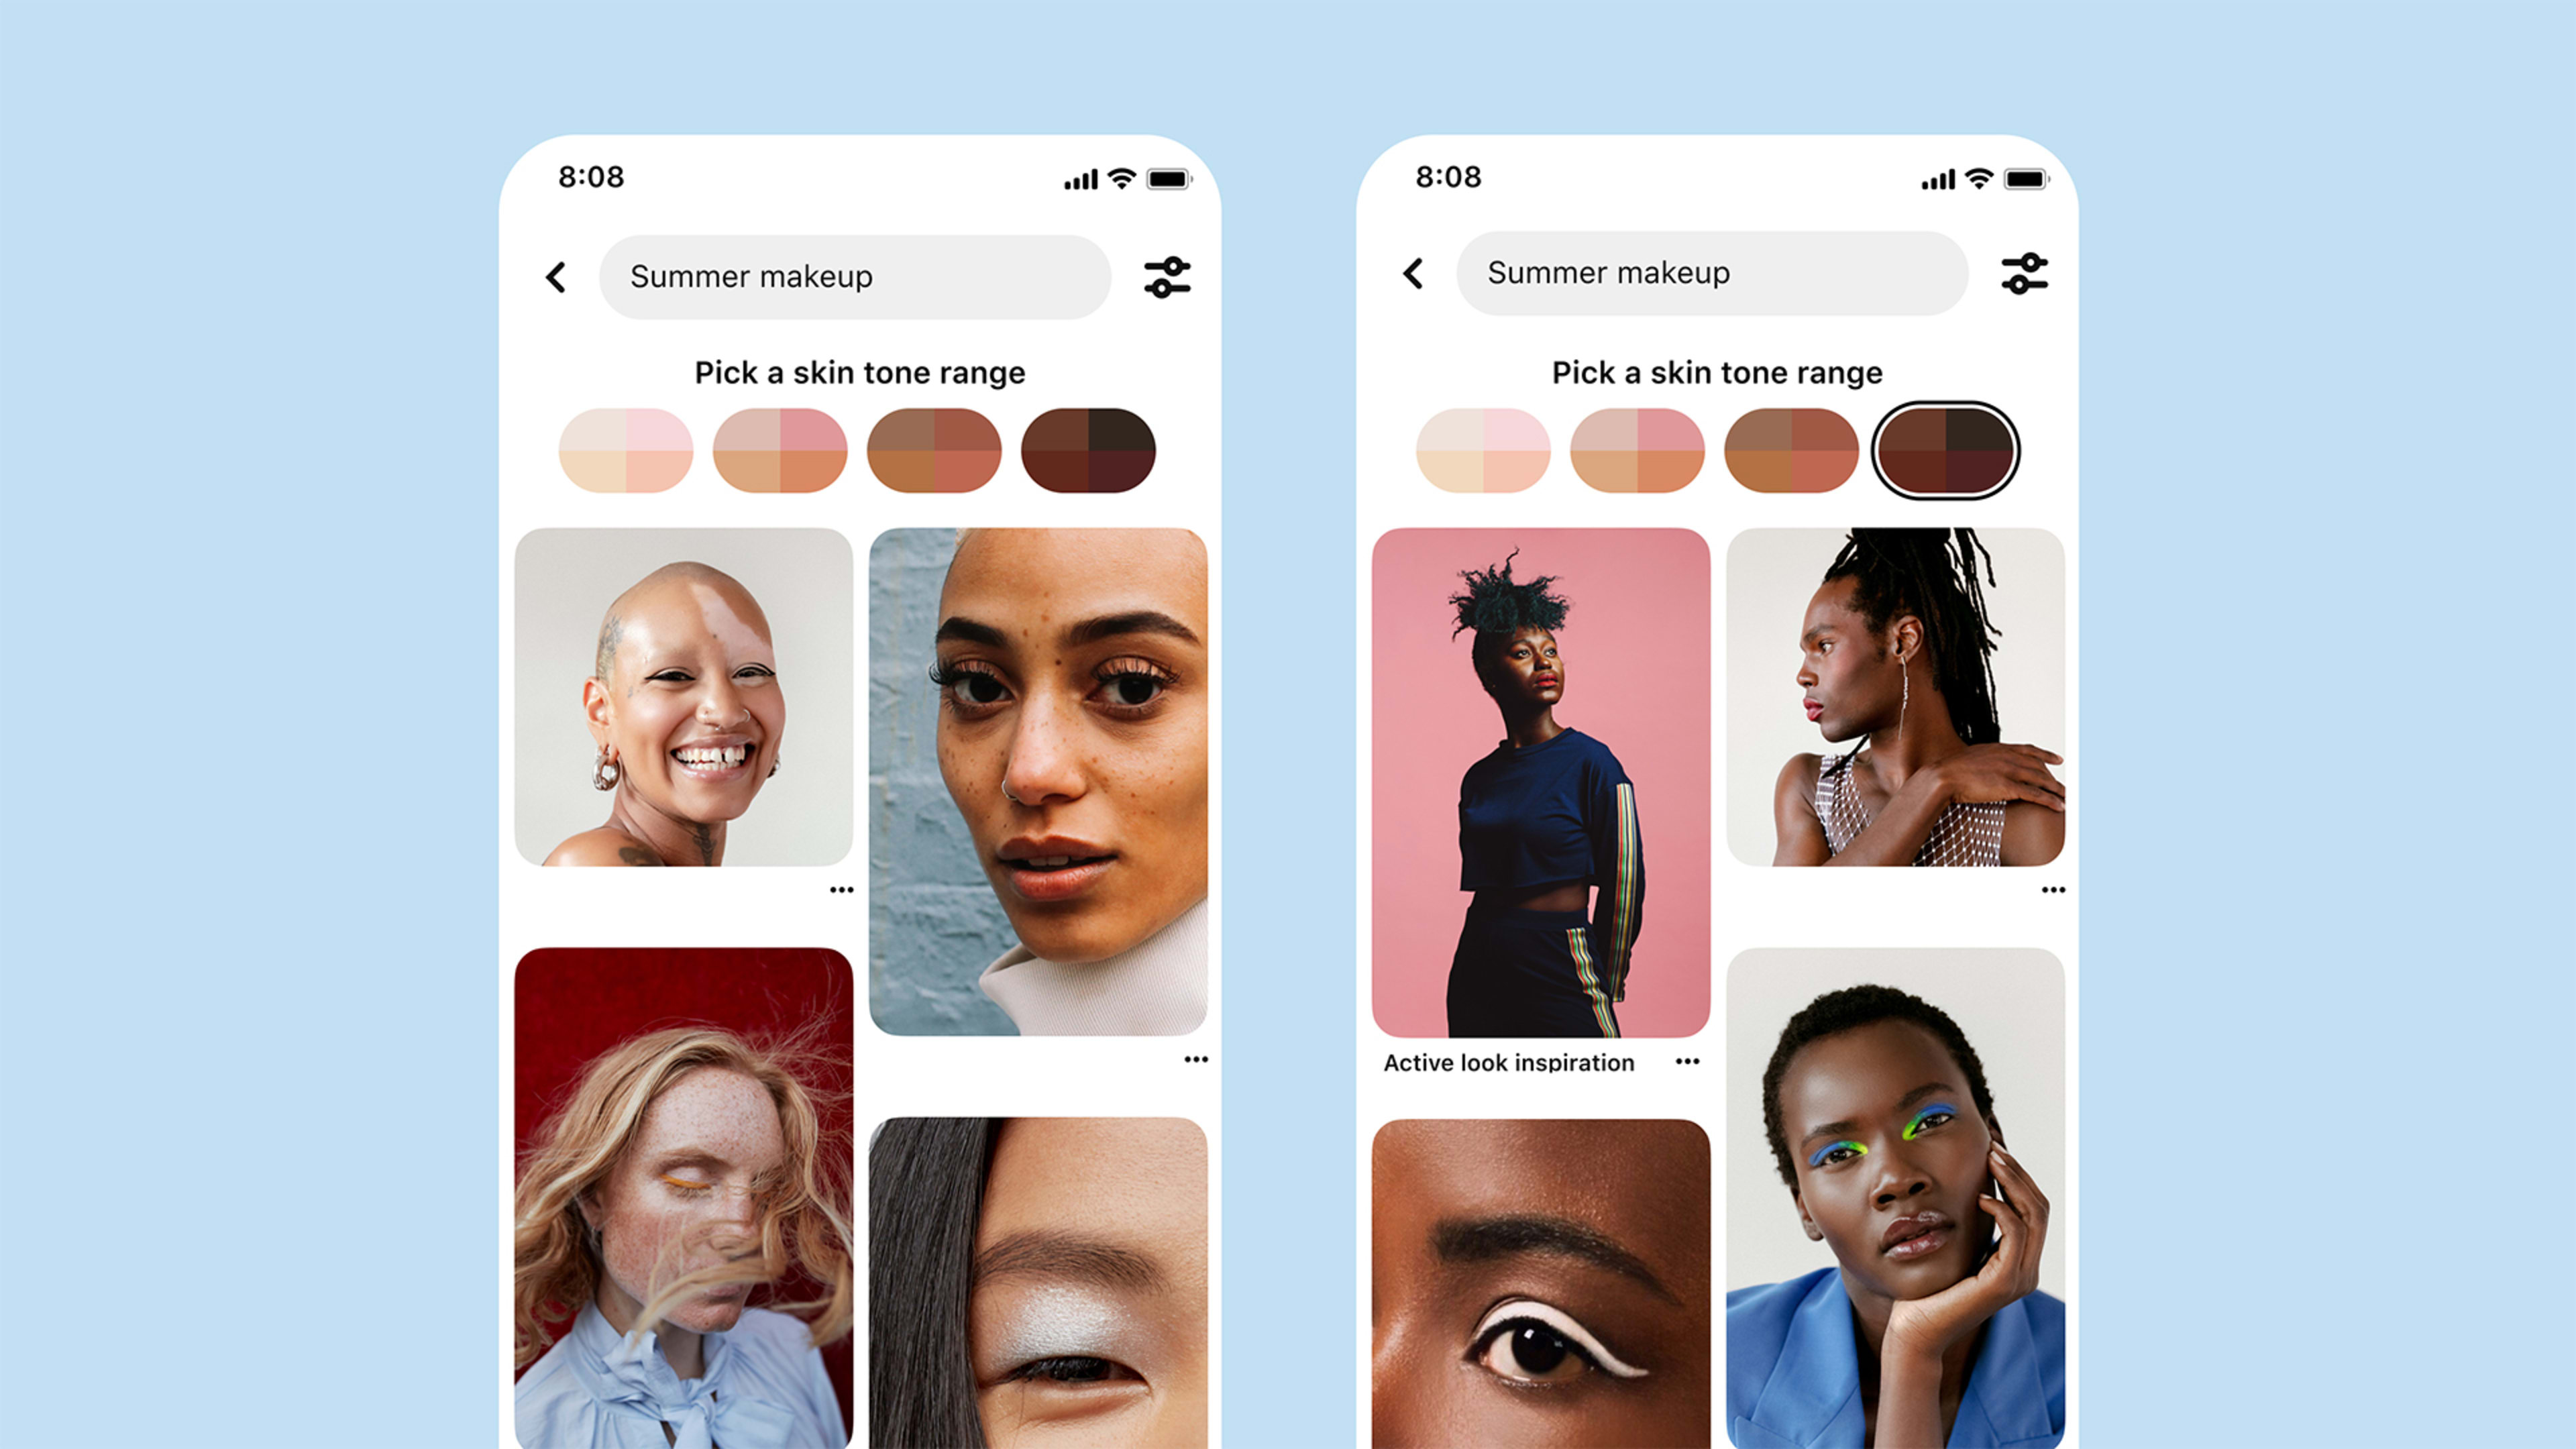 To get skin tones right, Pinterest’s AI went way beyond facial recognition